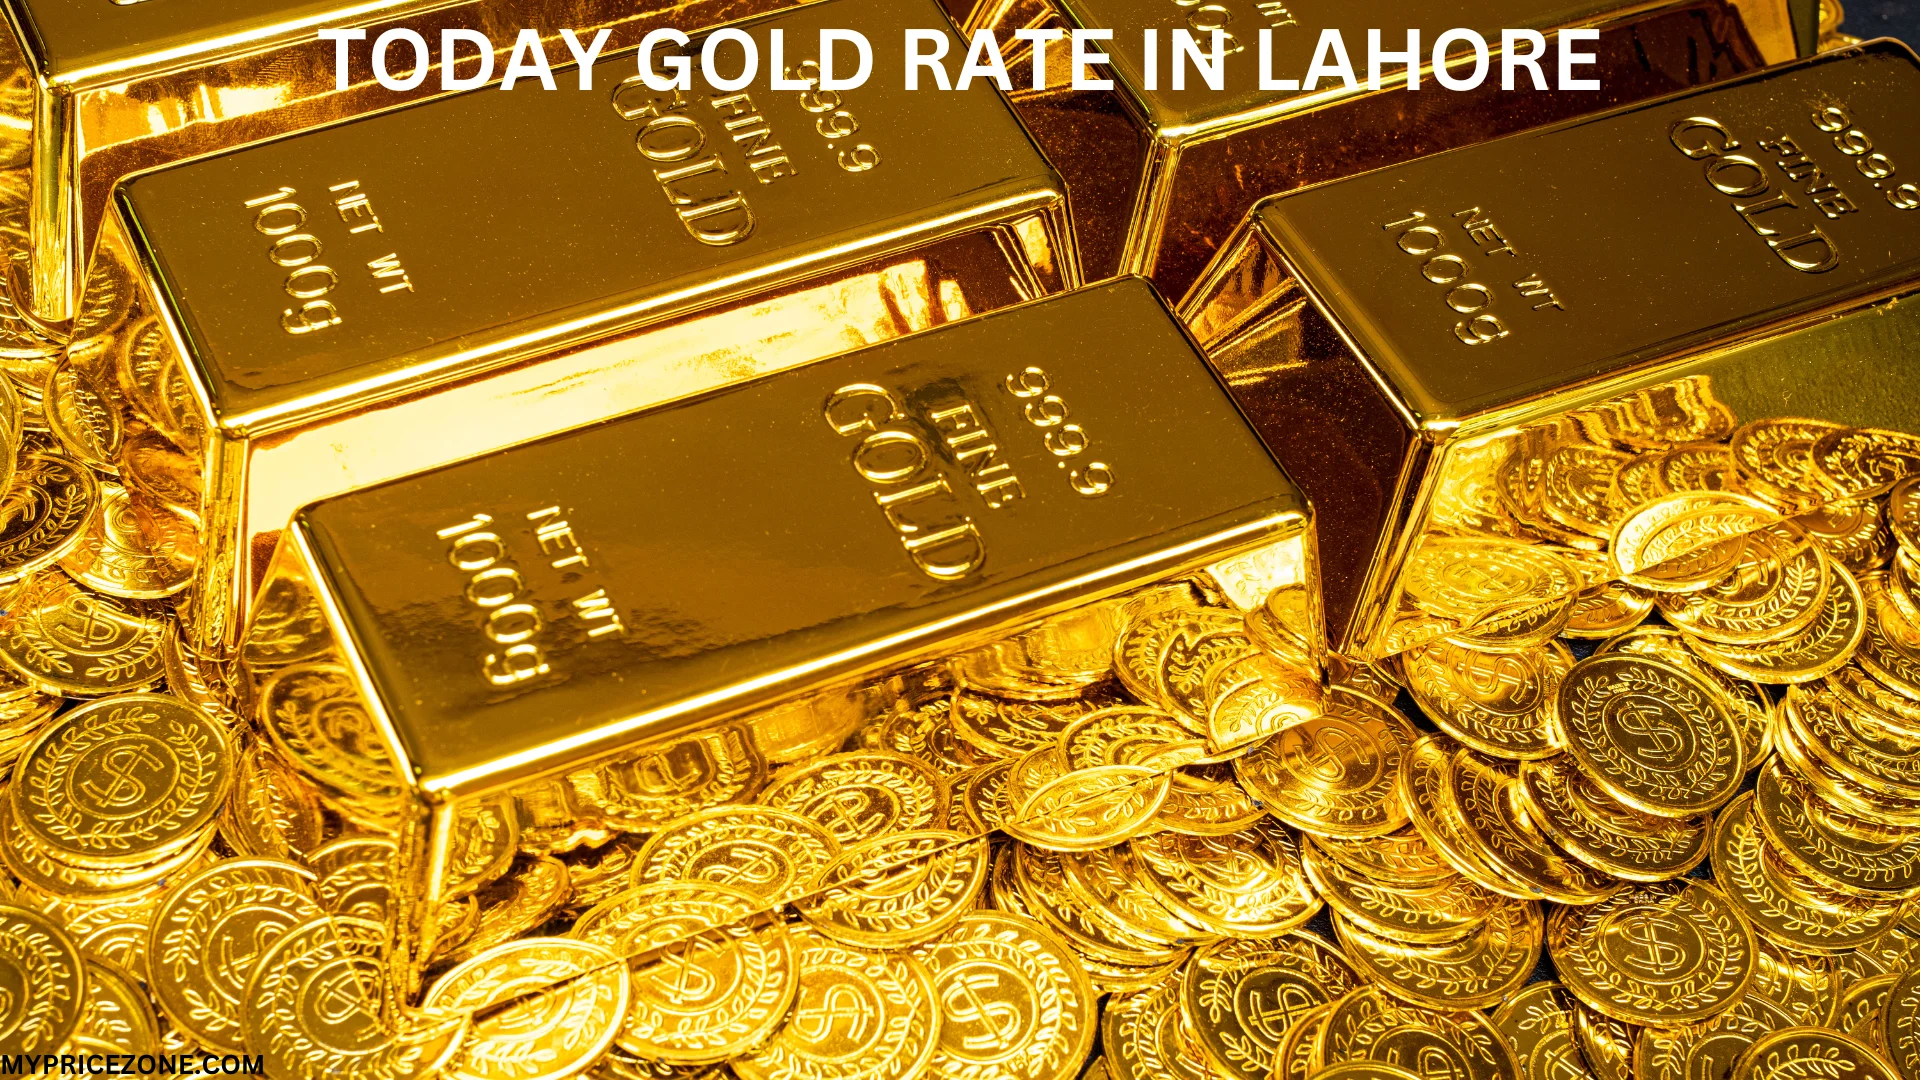 GOLD BARS AND COINS WITH TODAY GOLD RATE IN LAHORE